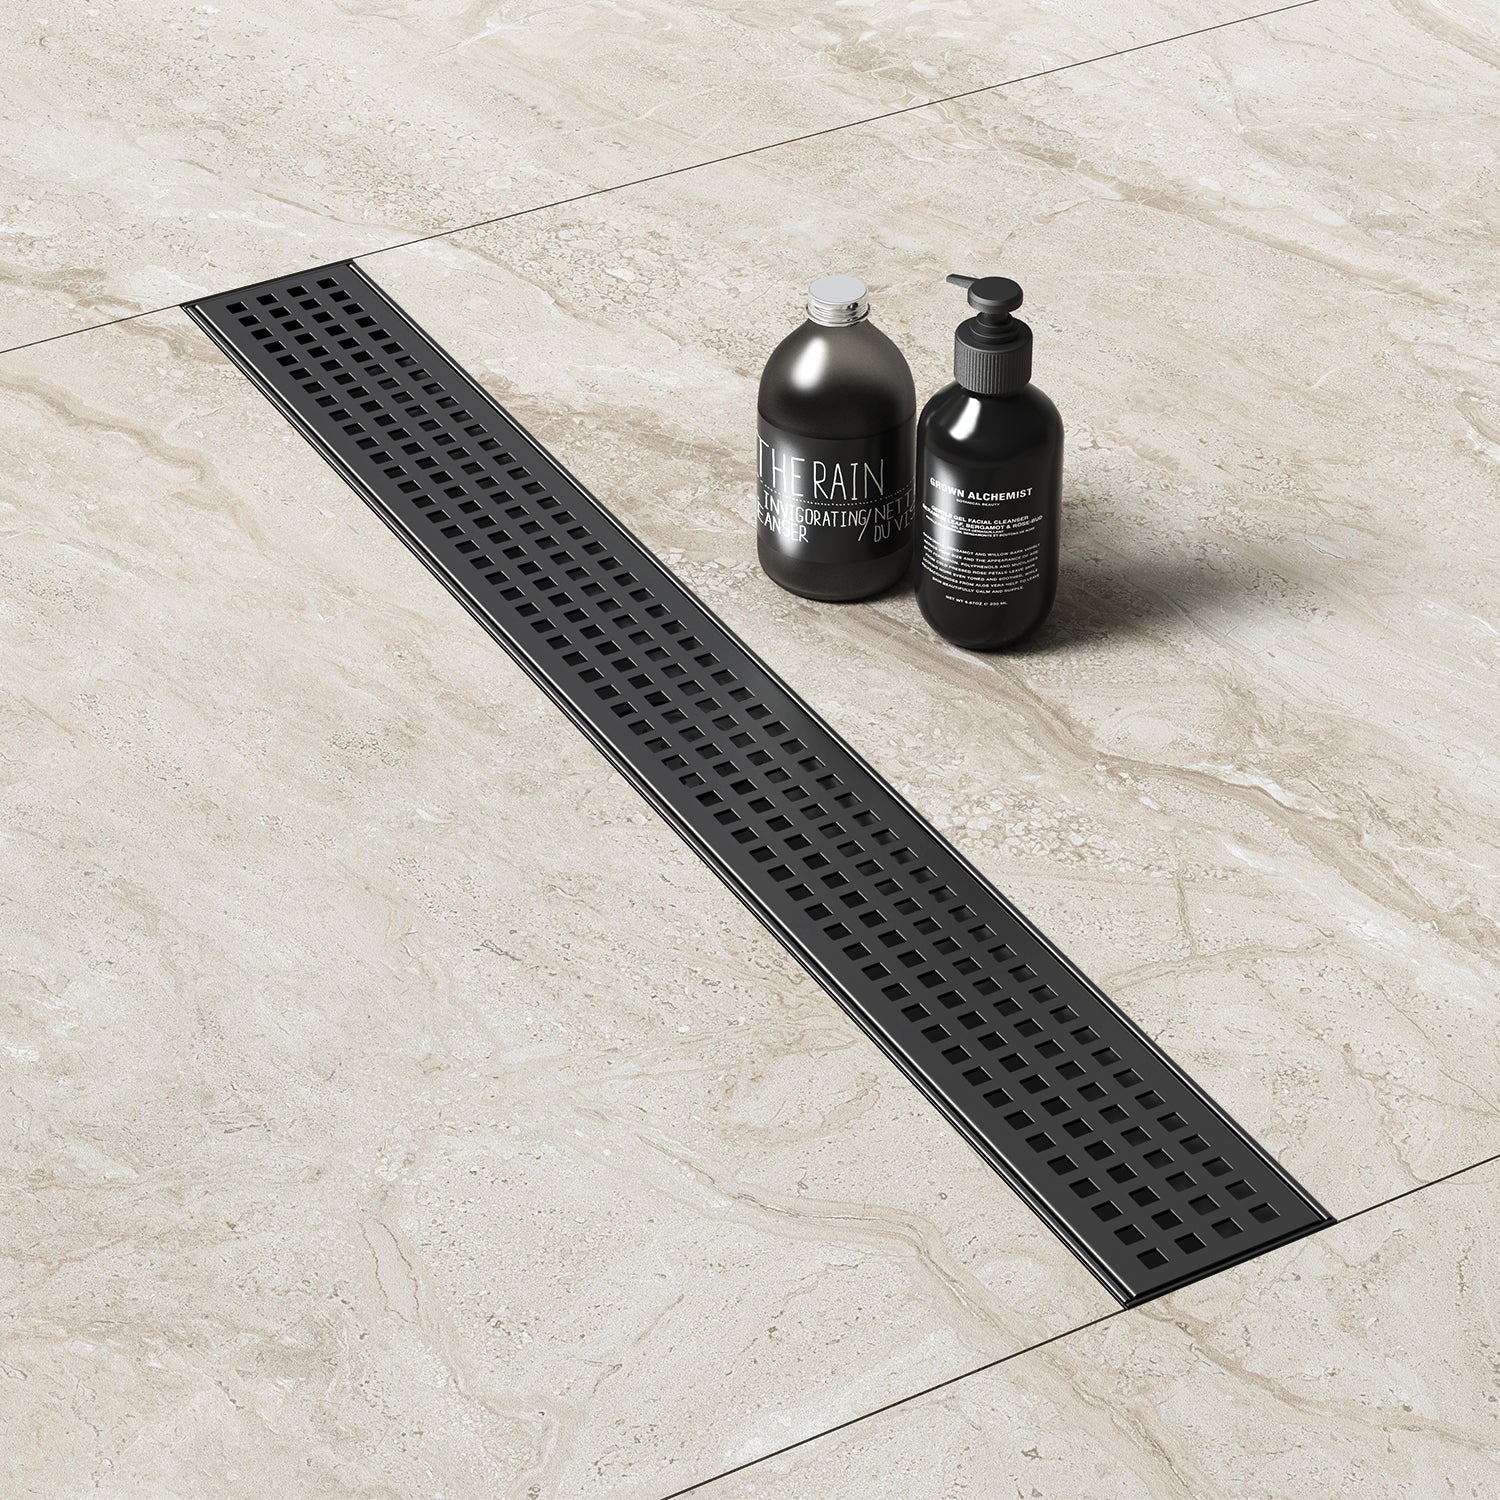 Shower and Floor Drains, Covers, and Accessories